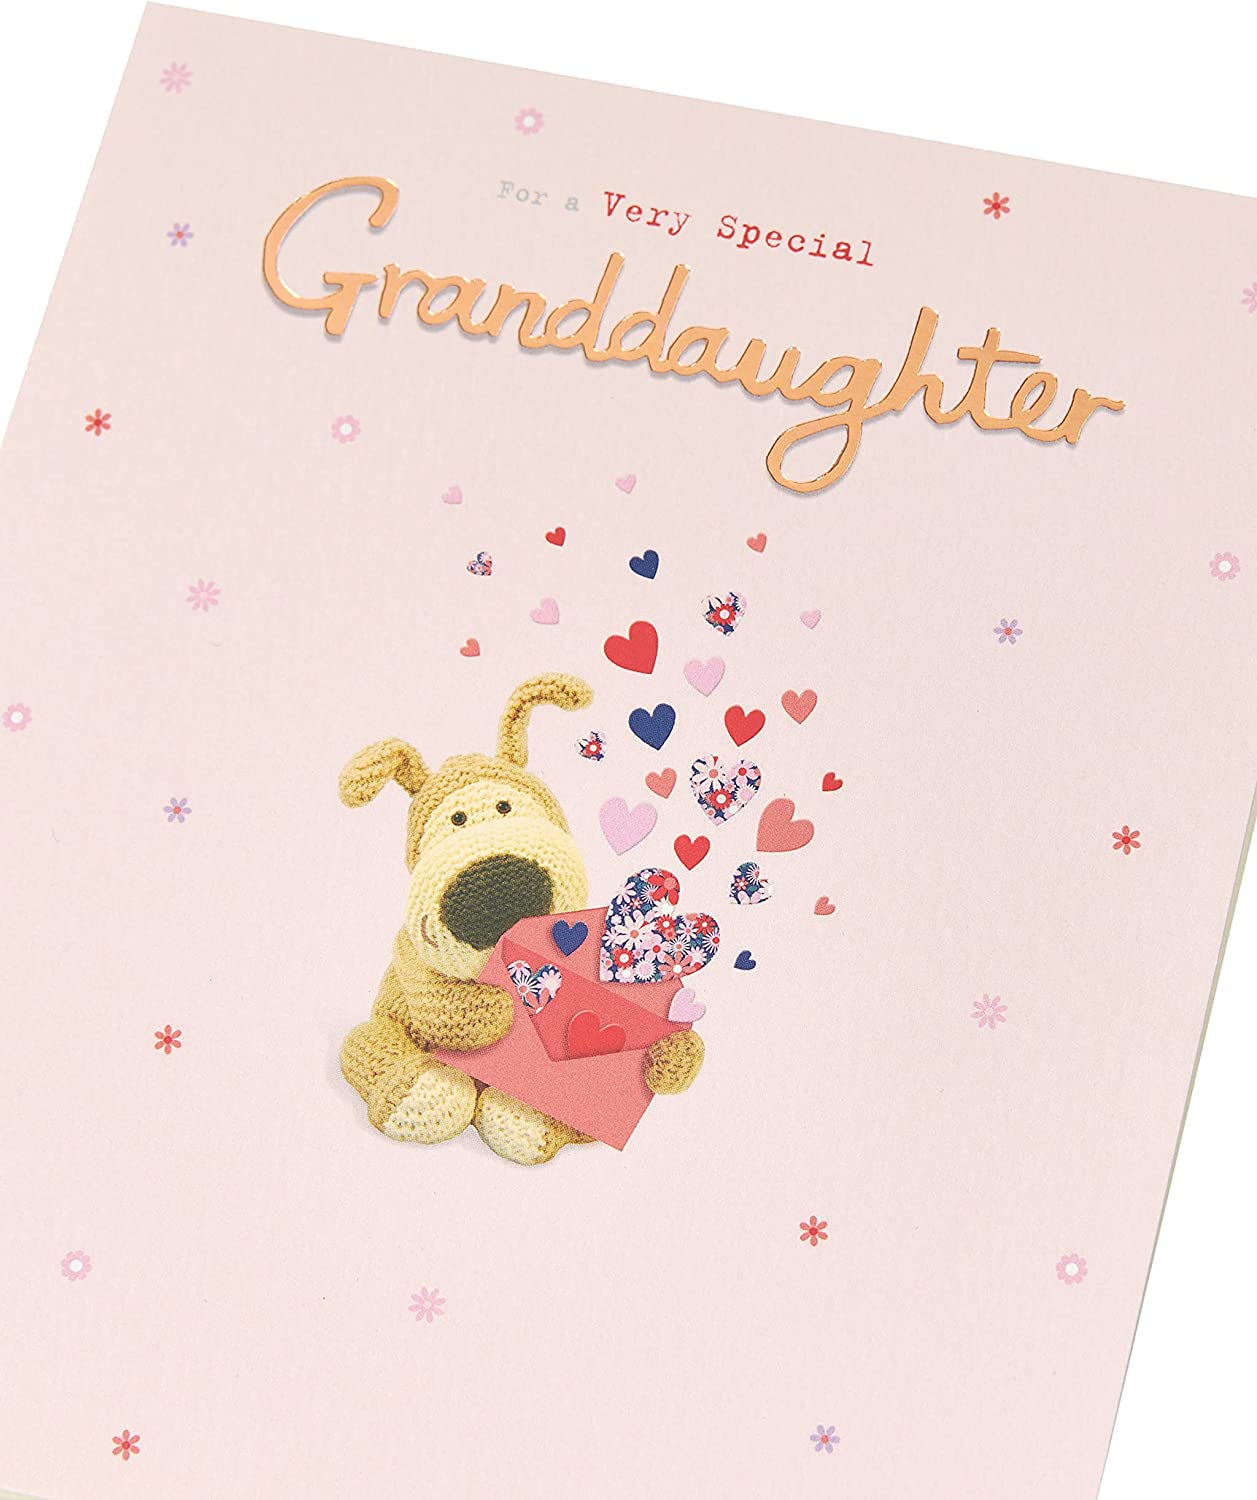 Boofle Sweet Design With Love Letter Granddaughter Birthday Card